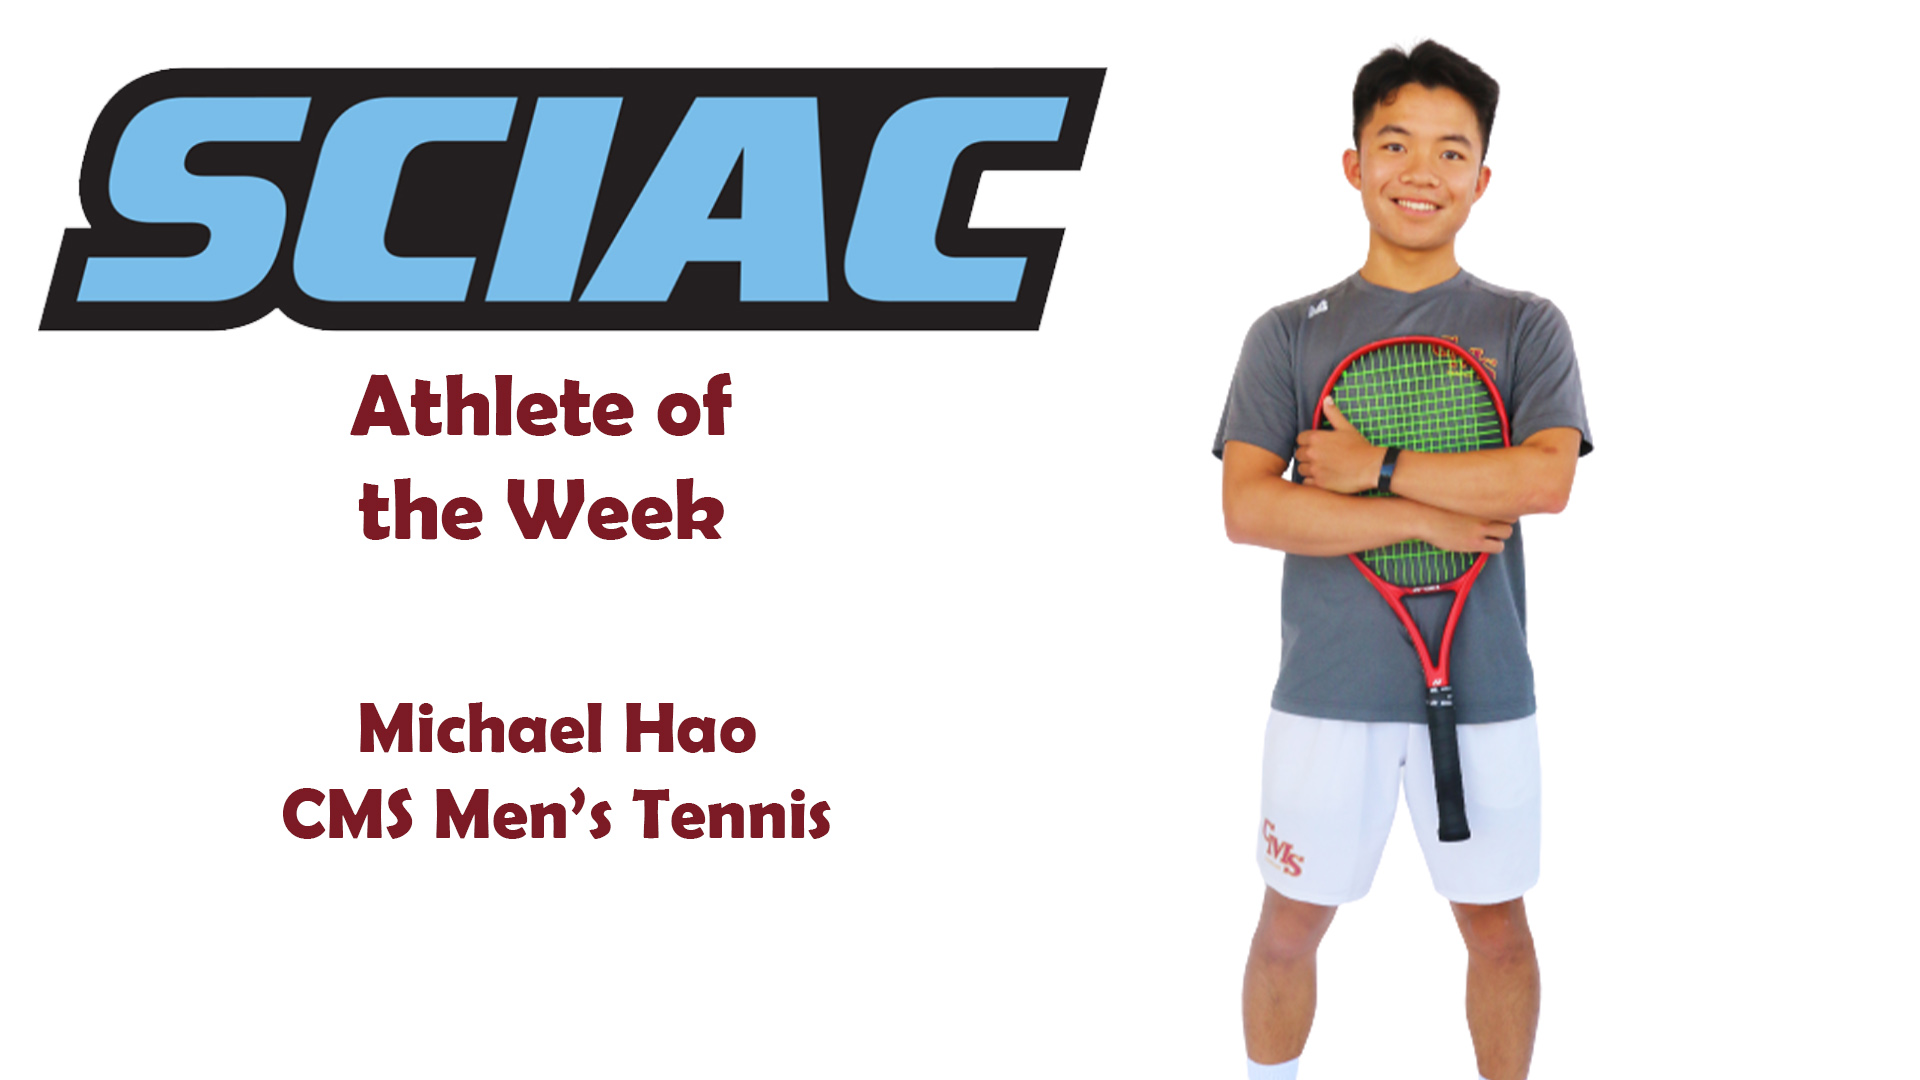 Michael Hao posed shot with the SCIAC logo